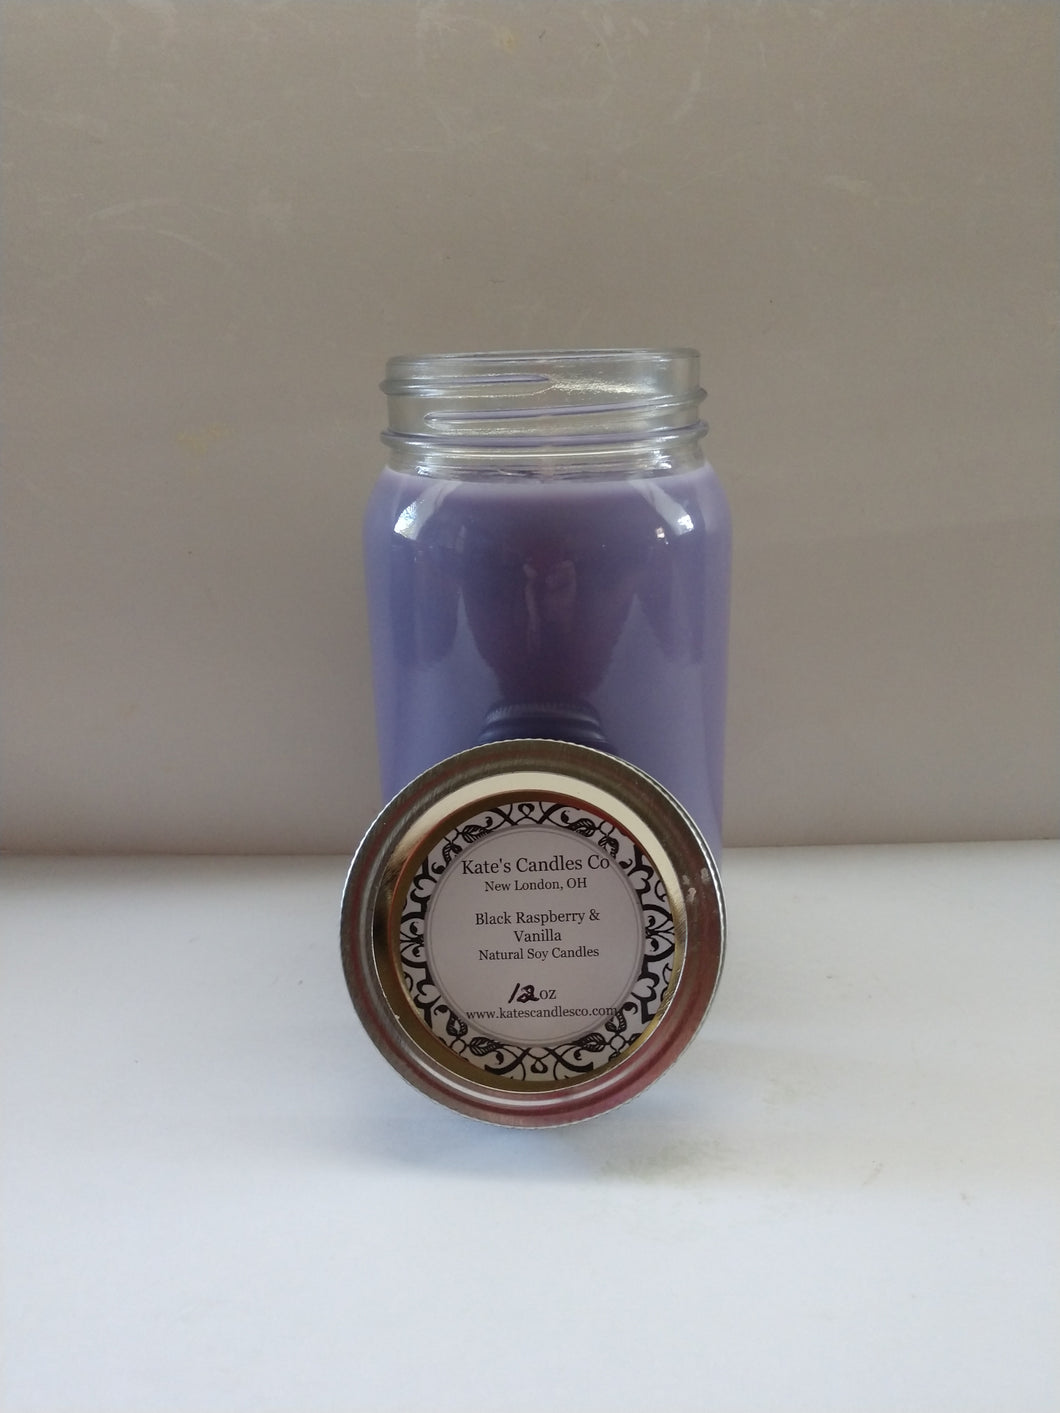 Black Raspberry & Vanilla Scented Soy Candles - Kate's Candles Co. Soy Candles